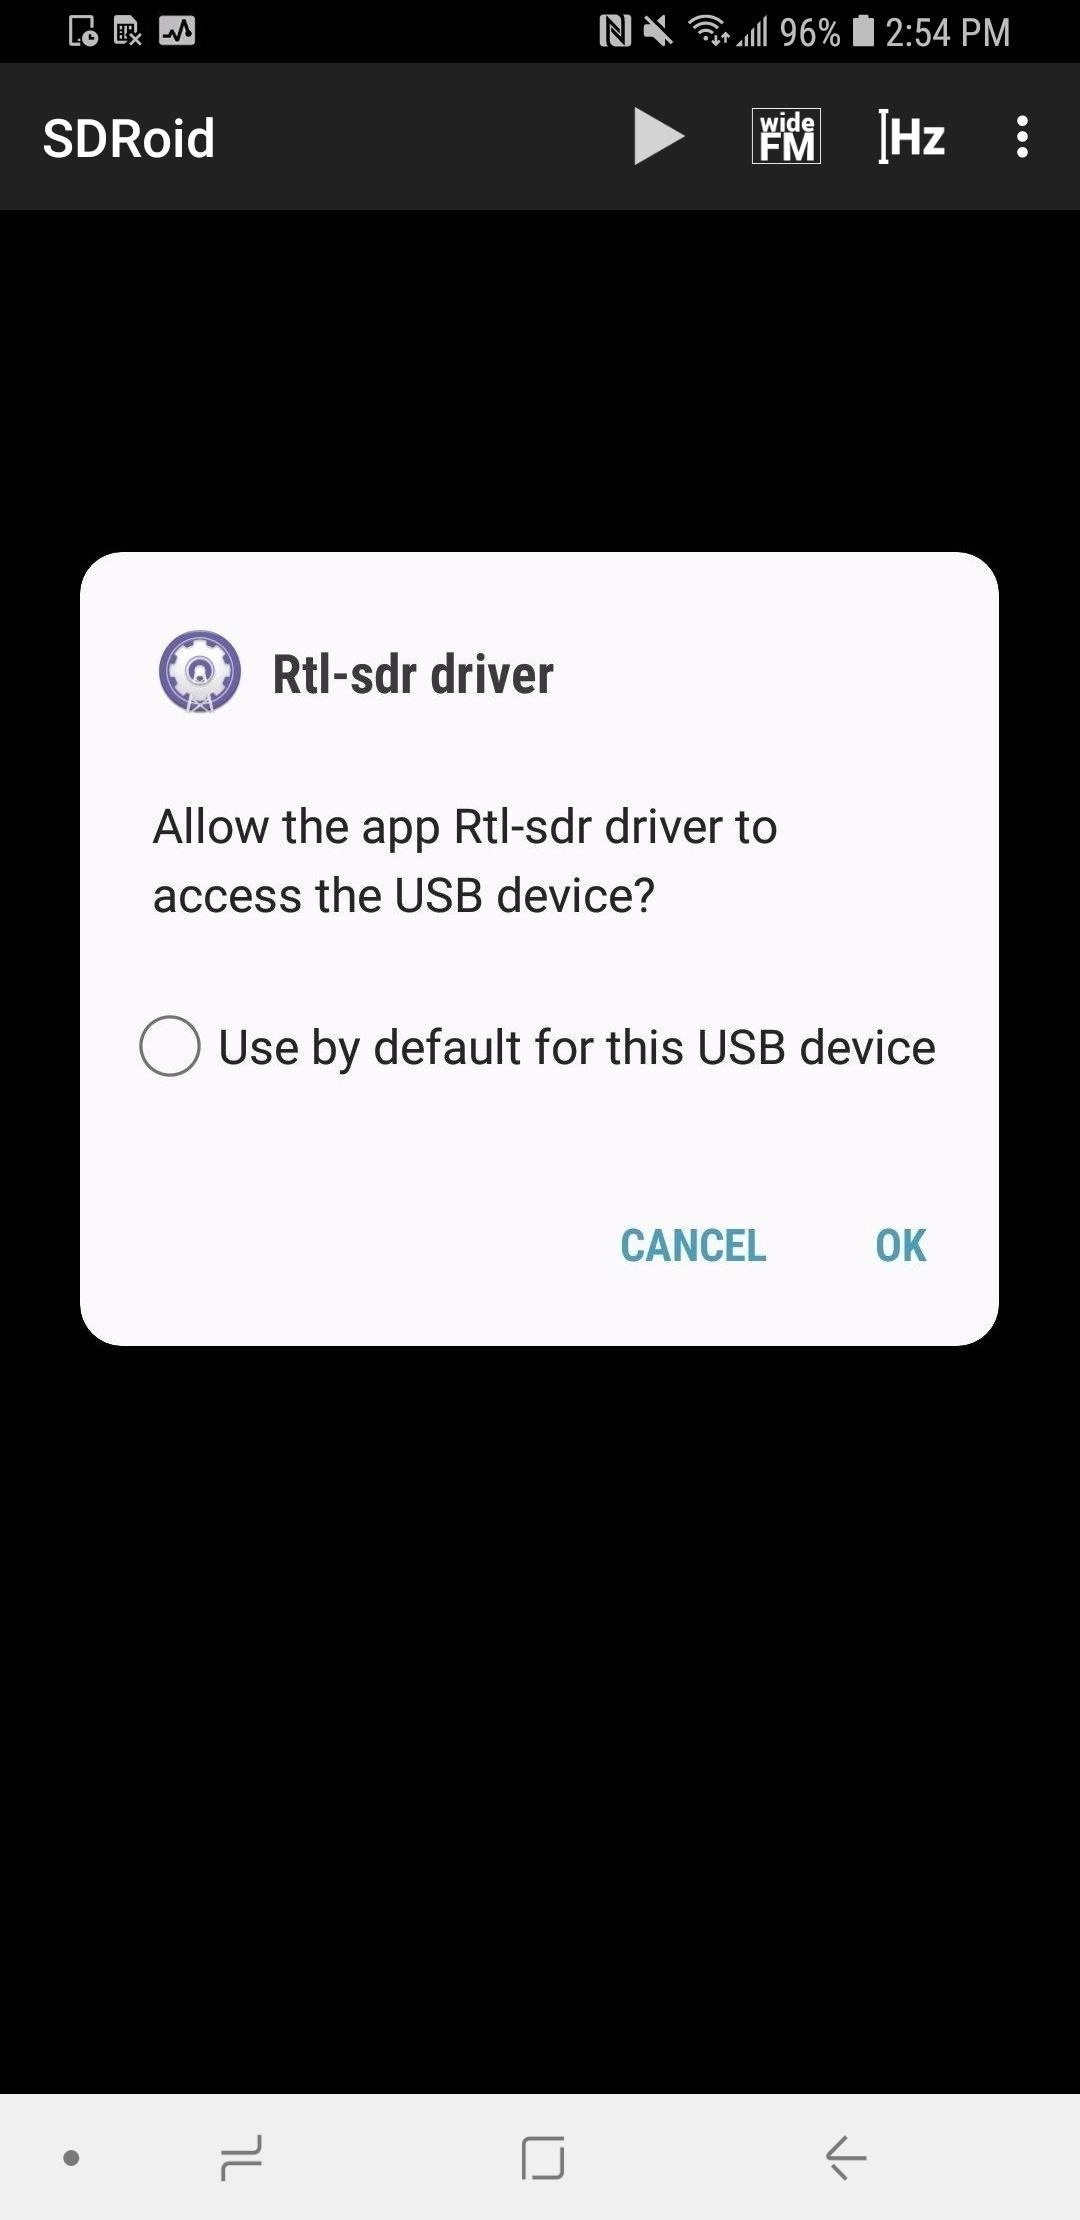 How to Listen to Radio Conversations on Android with an RTL-SDR Dongle & OTG Adapter